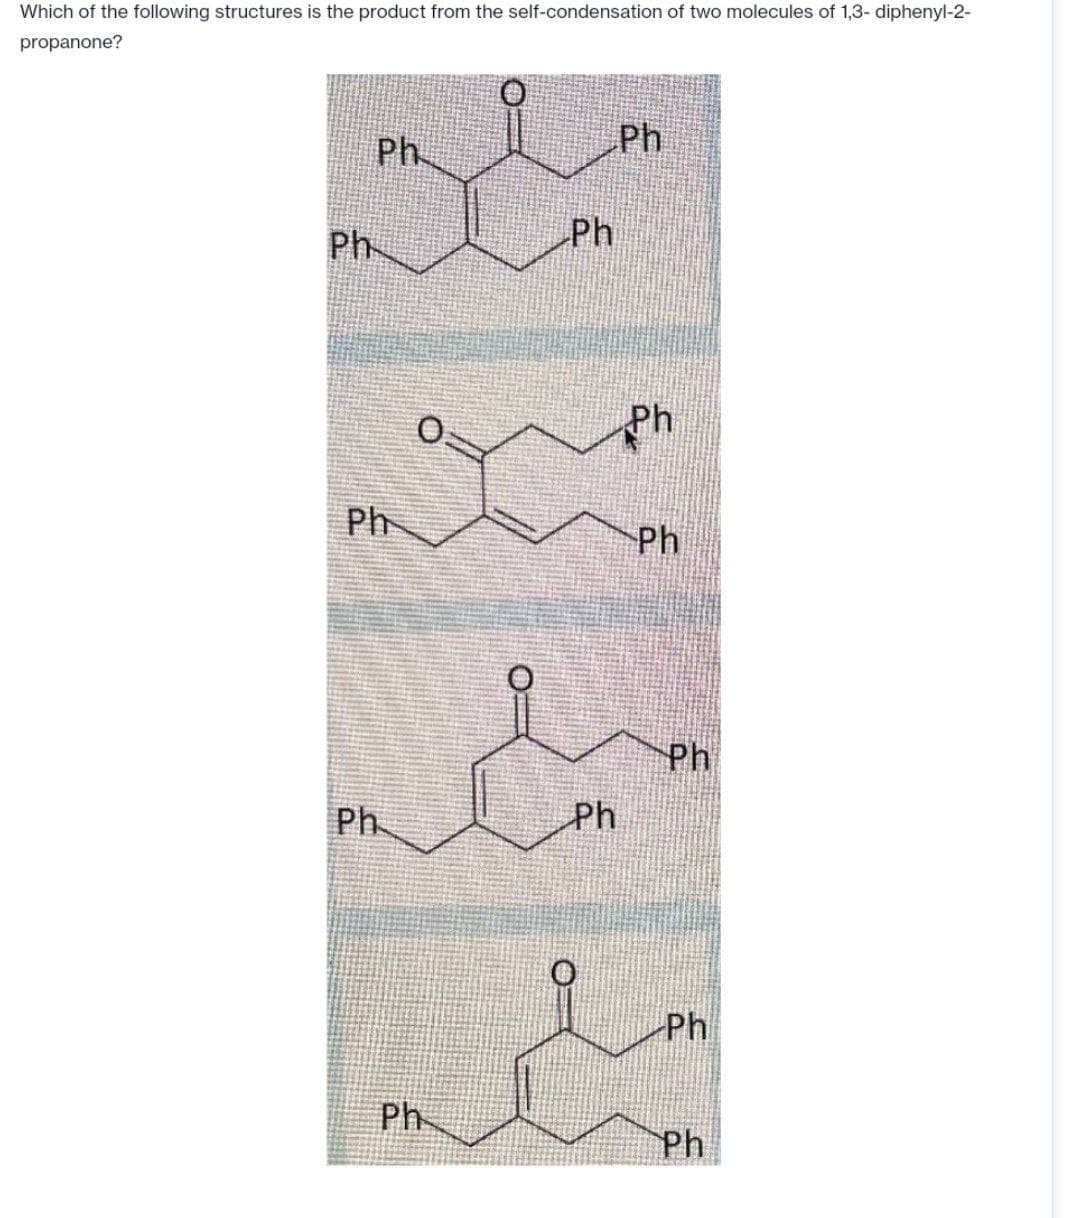 Which of the following structures is the product from the self-condensation of two molecules of 1,3- diphenyl-2-
propanone?
Ph
Ph
Ph
Ph
Ph
Ph
Ph
&
Ph
Ph
Ph
Ph
Ph
Ph